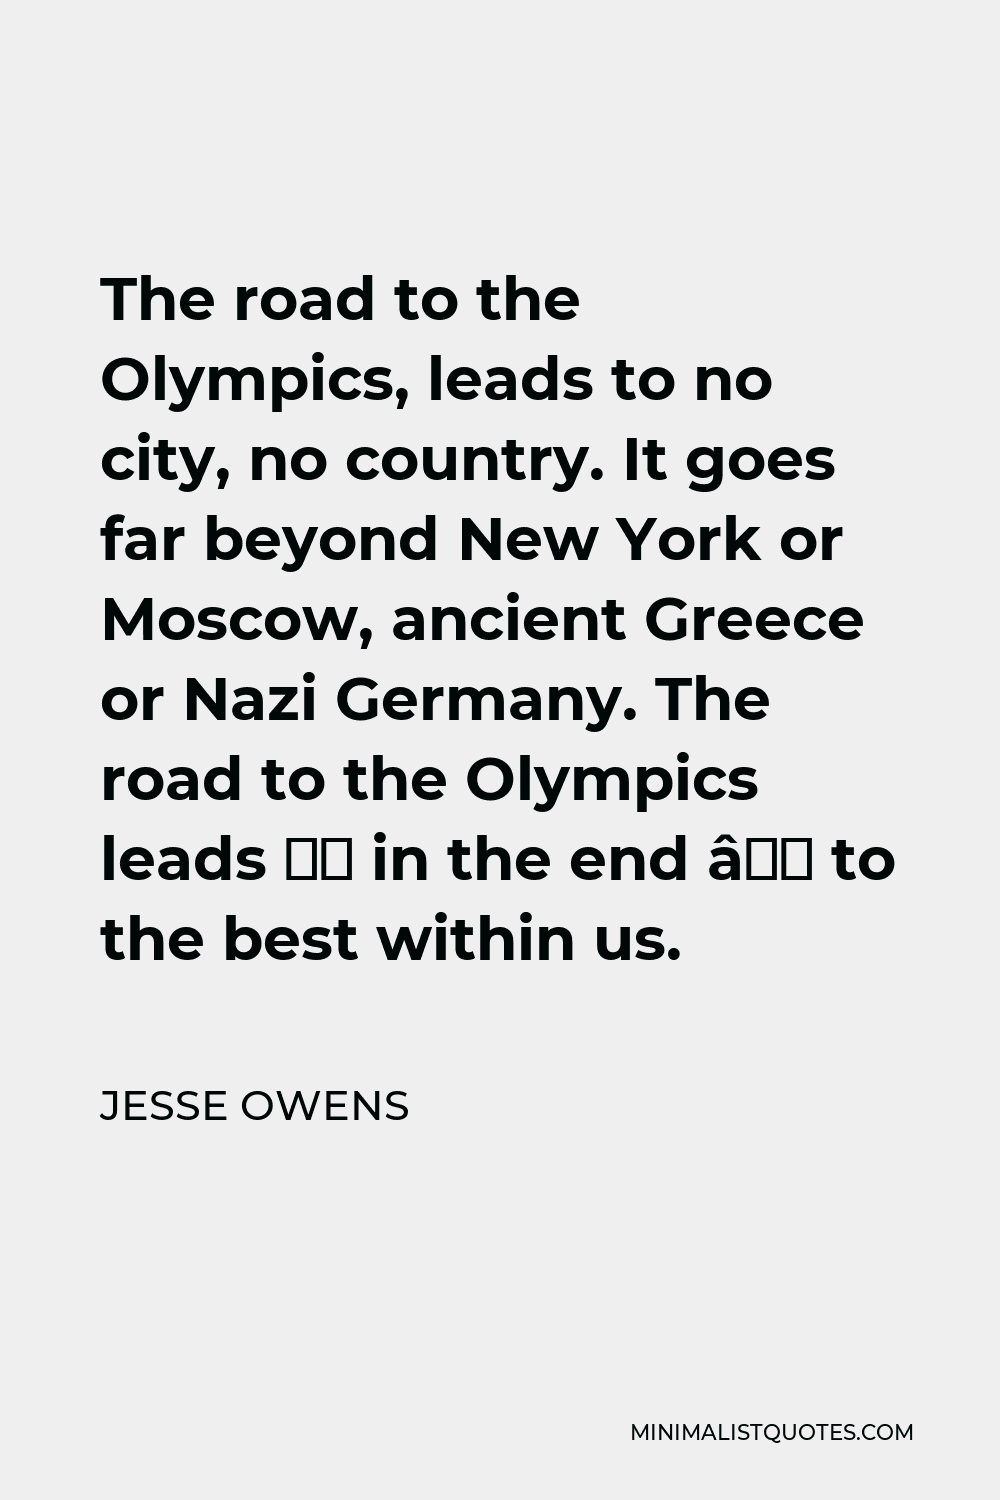 Jesse Owens Quote - The road to the Olympics, leads to no city, no country. It goes far beyond New York or Moscow, ancient Greece or Nazi Germany. The road to the Olympics leads — in the end — to the best within us.